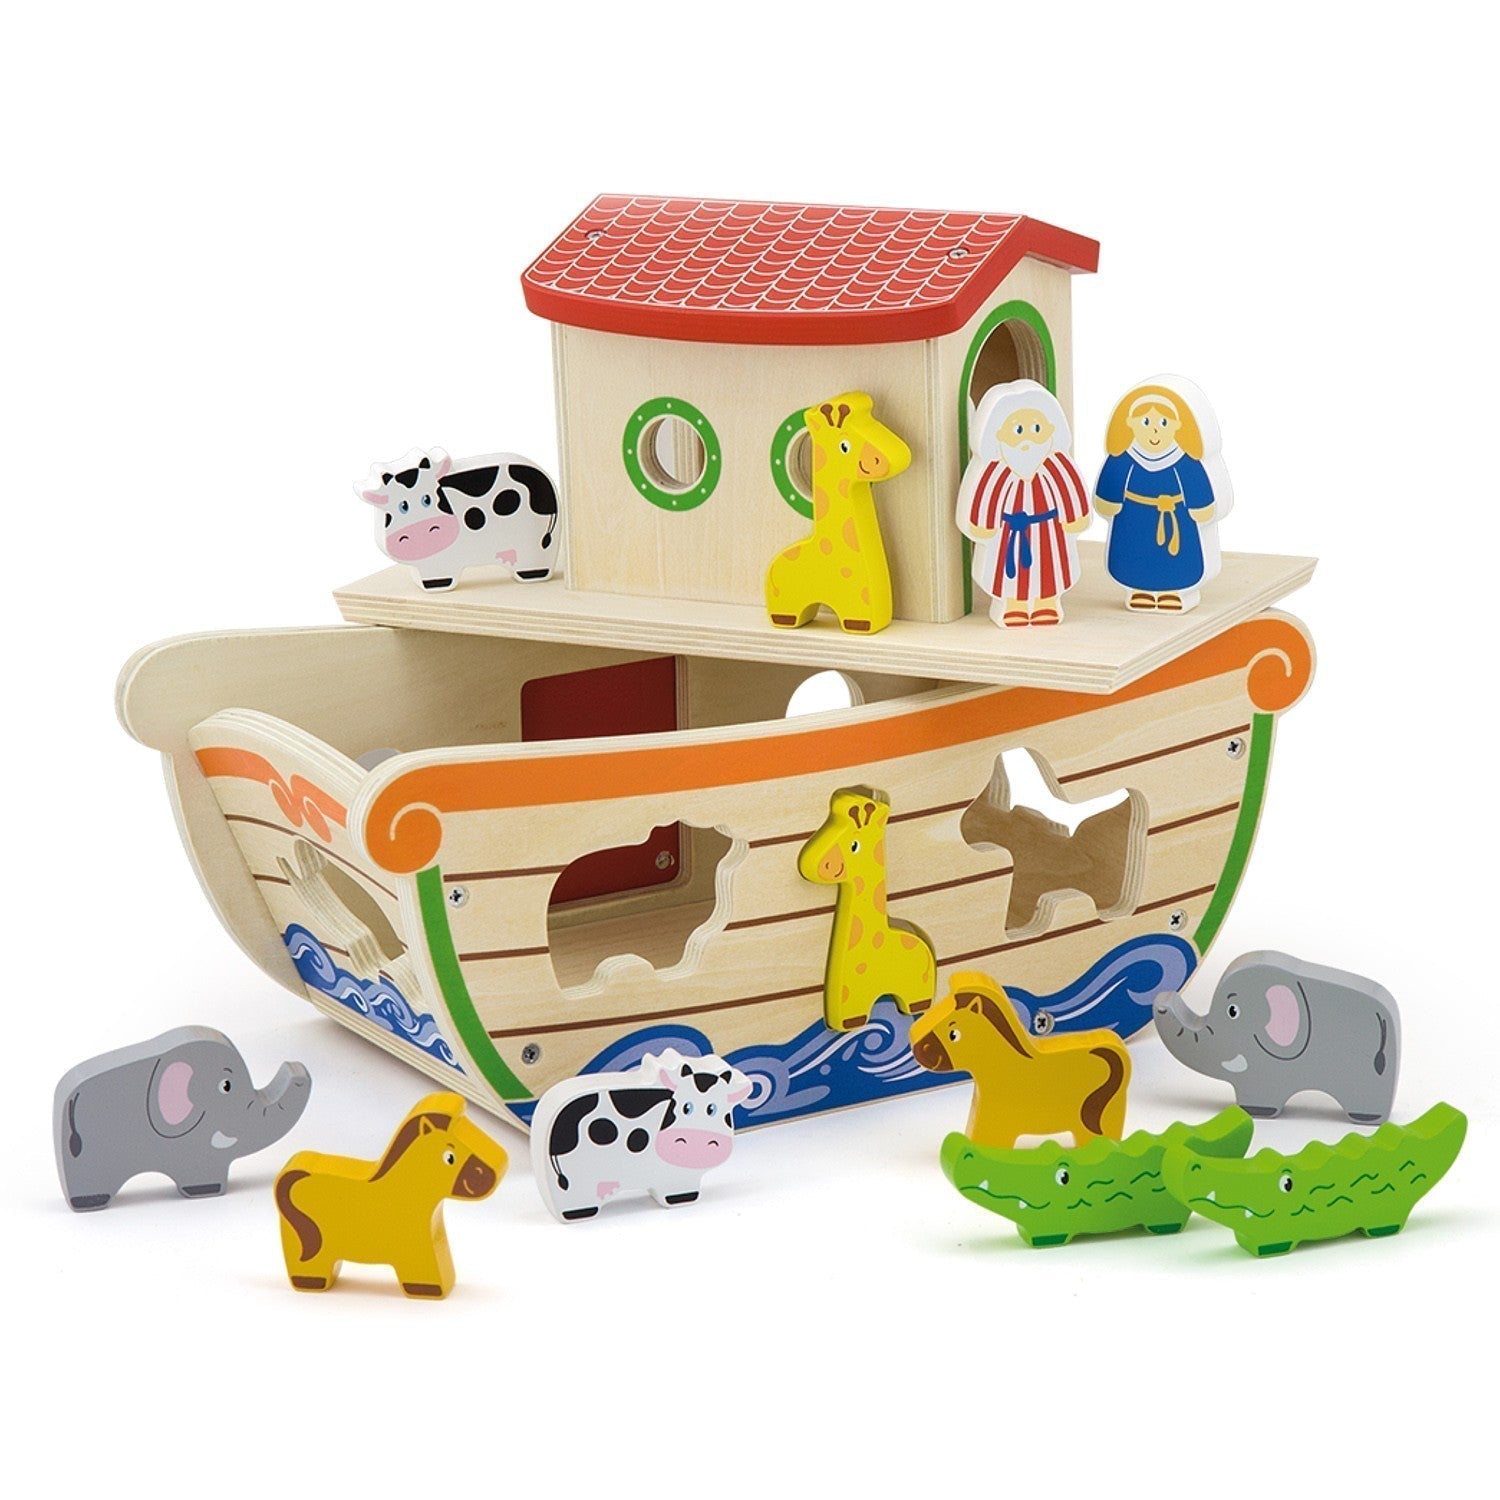 Noahs Ark Shape Sorter, Little hands will love sorting their animal friends with this Noah's Ark Shape Sorter.This durable wooden Noah's Ark Shape Sorter is the perfect companion for little explorers.It includes a chunky wooden Ark, as well as colourful characters to sort into the boat.Little ones will enjoy fitting the animals through the windows, cut-out slots or up the detachable walkway ladder.For even more fun, your little ones can try to pair up the matching animals before hopping on the Ark.This colo